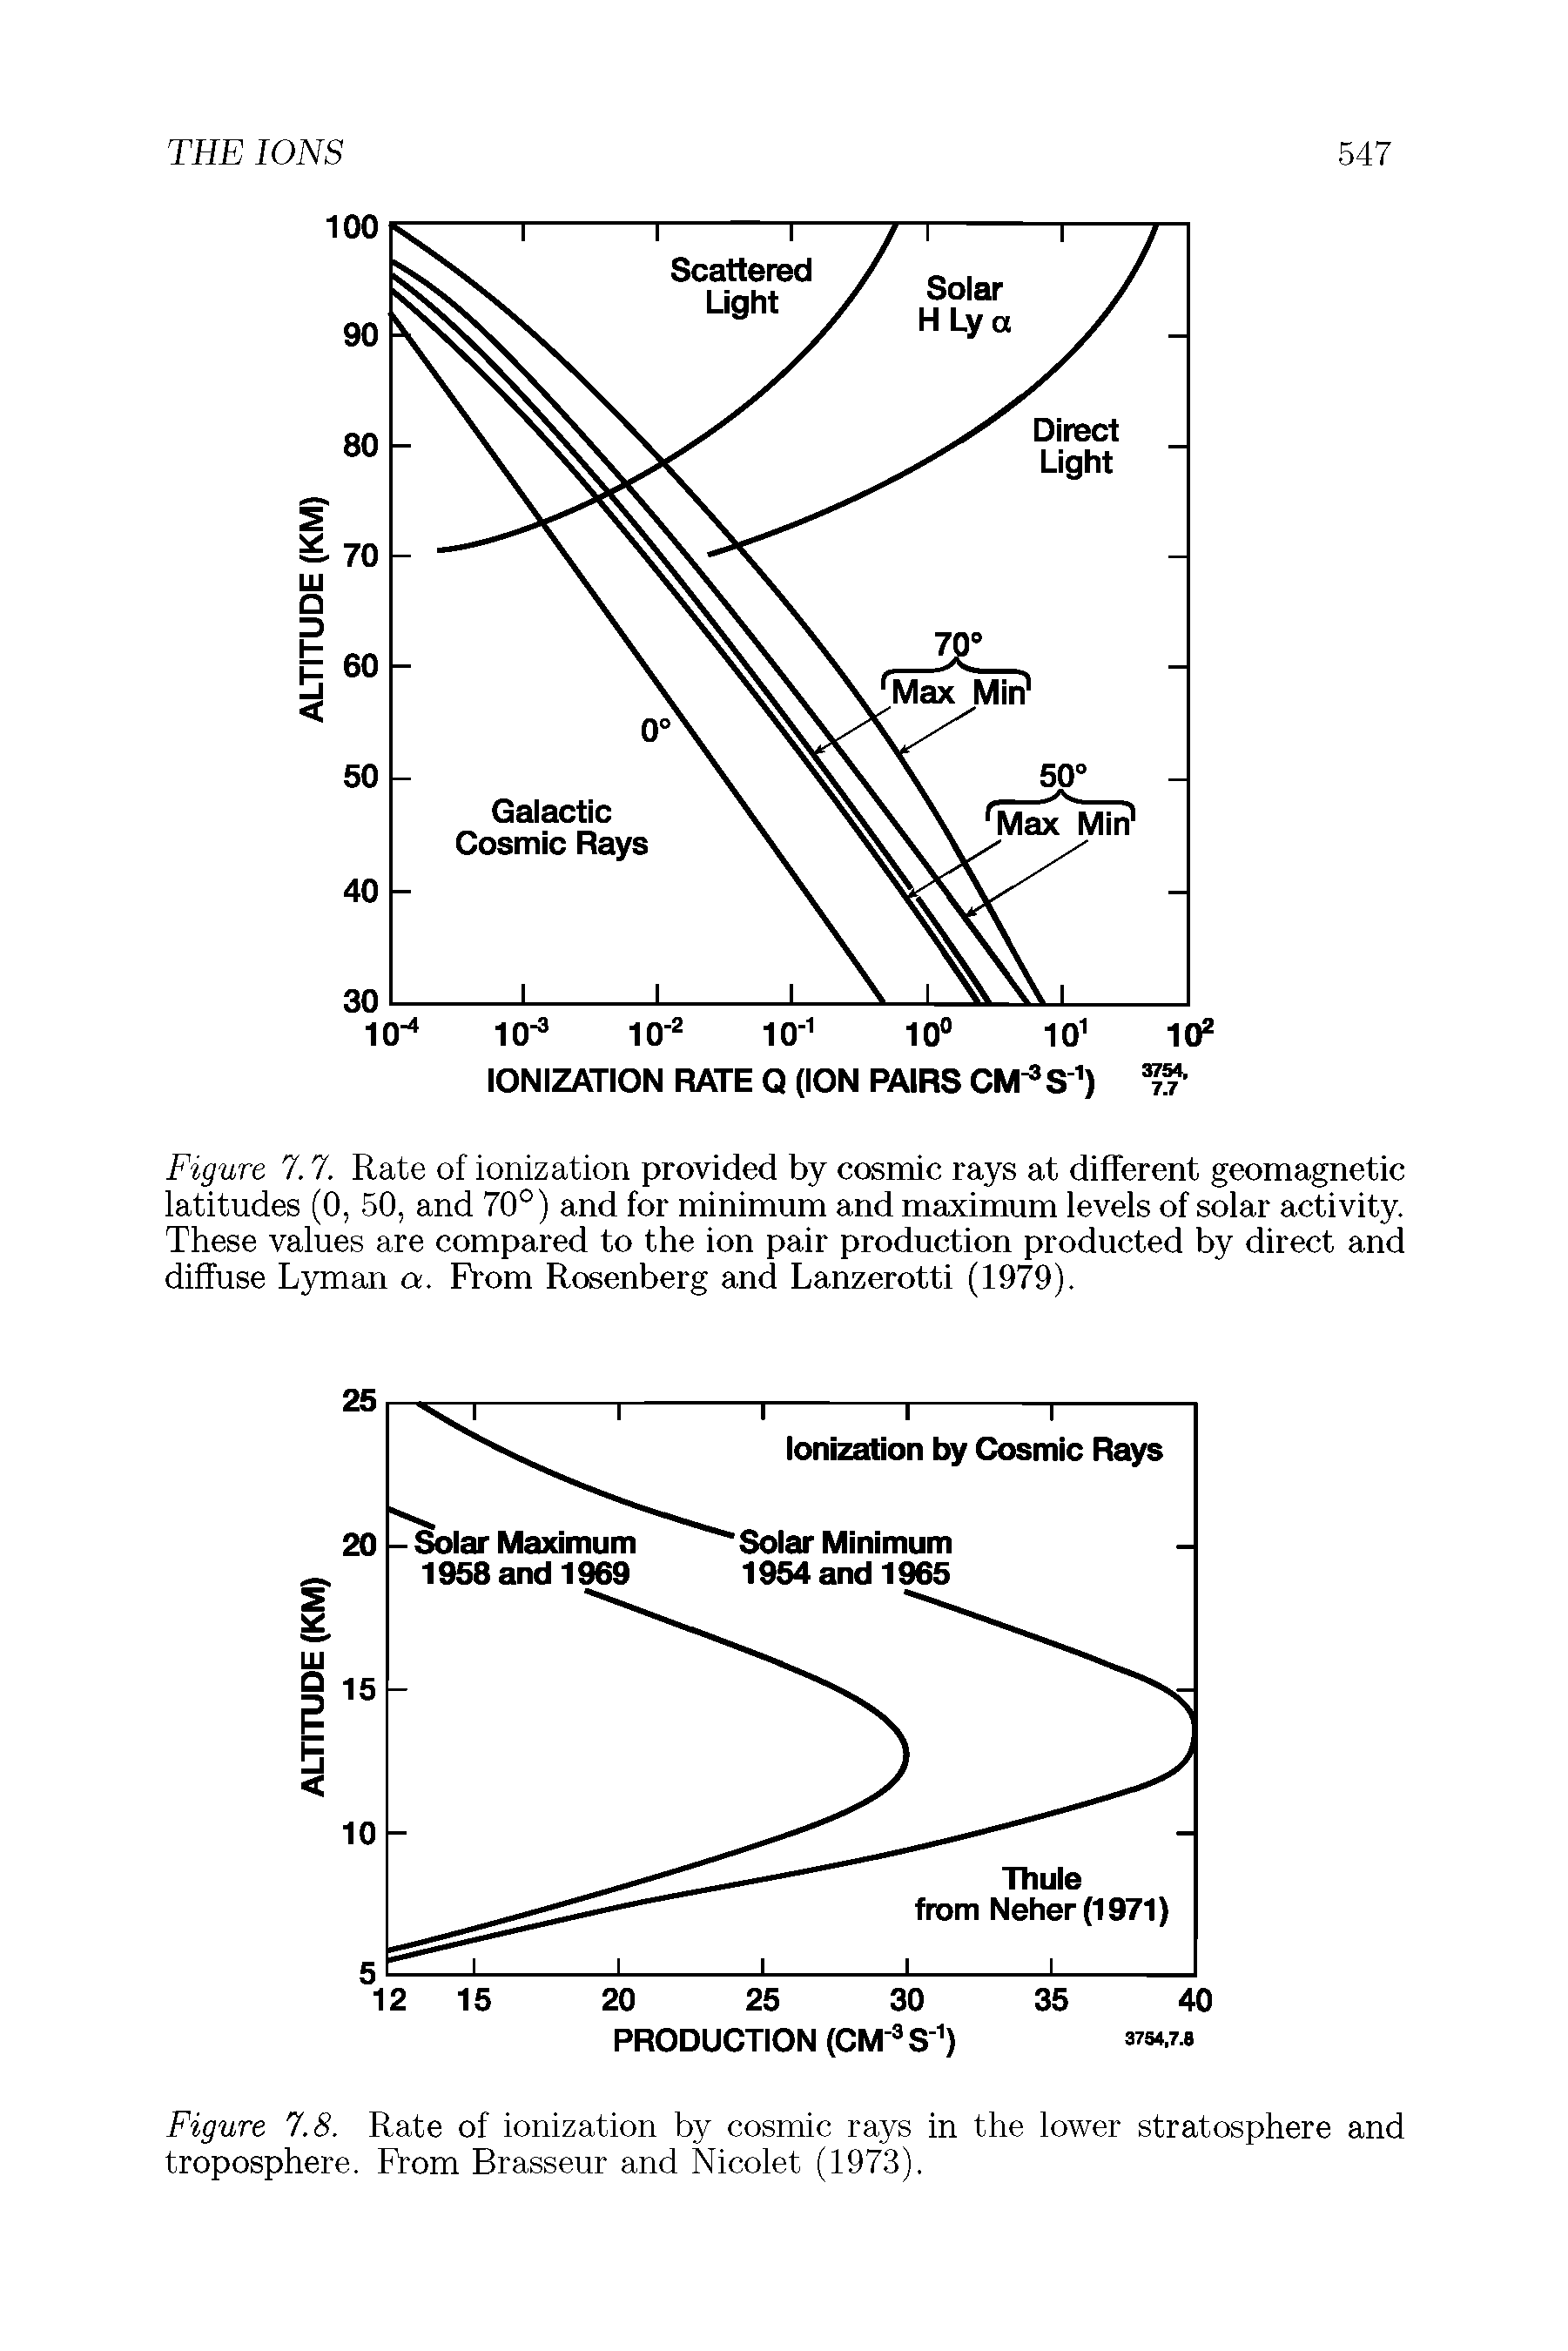 Figure 7.8. Rate of ionization by cosmic rays in the lower stratosphere and troposphere. From Brasseur and Nicolet (1973).